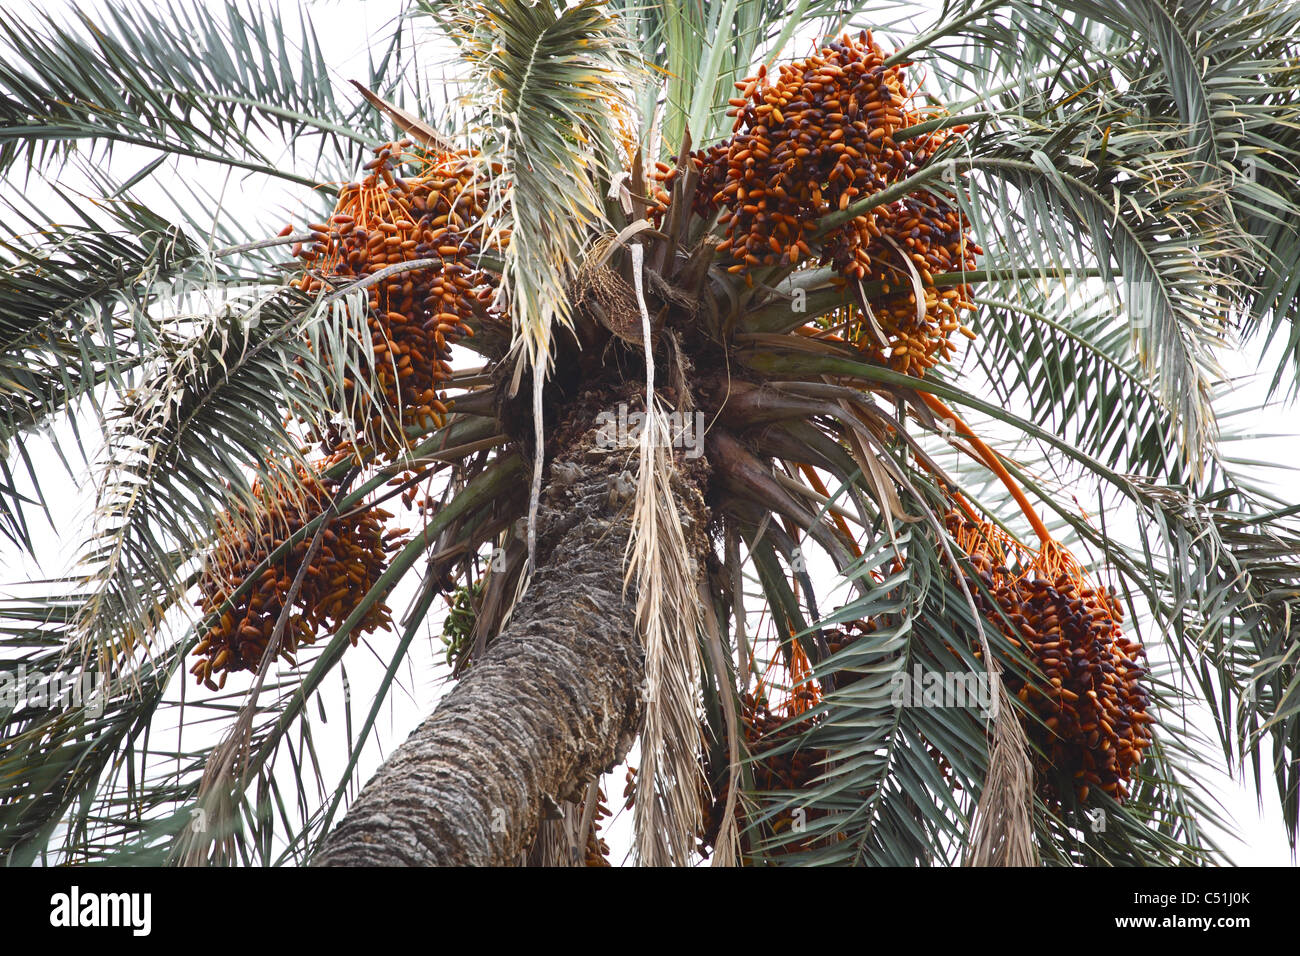 Africa, North Africa, Tunisia, Tamerza Oasis, Dates hanging from Date Palm Tree Stock Photo